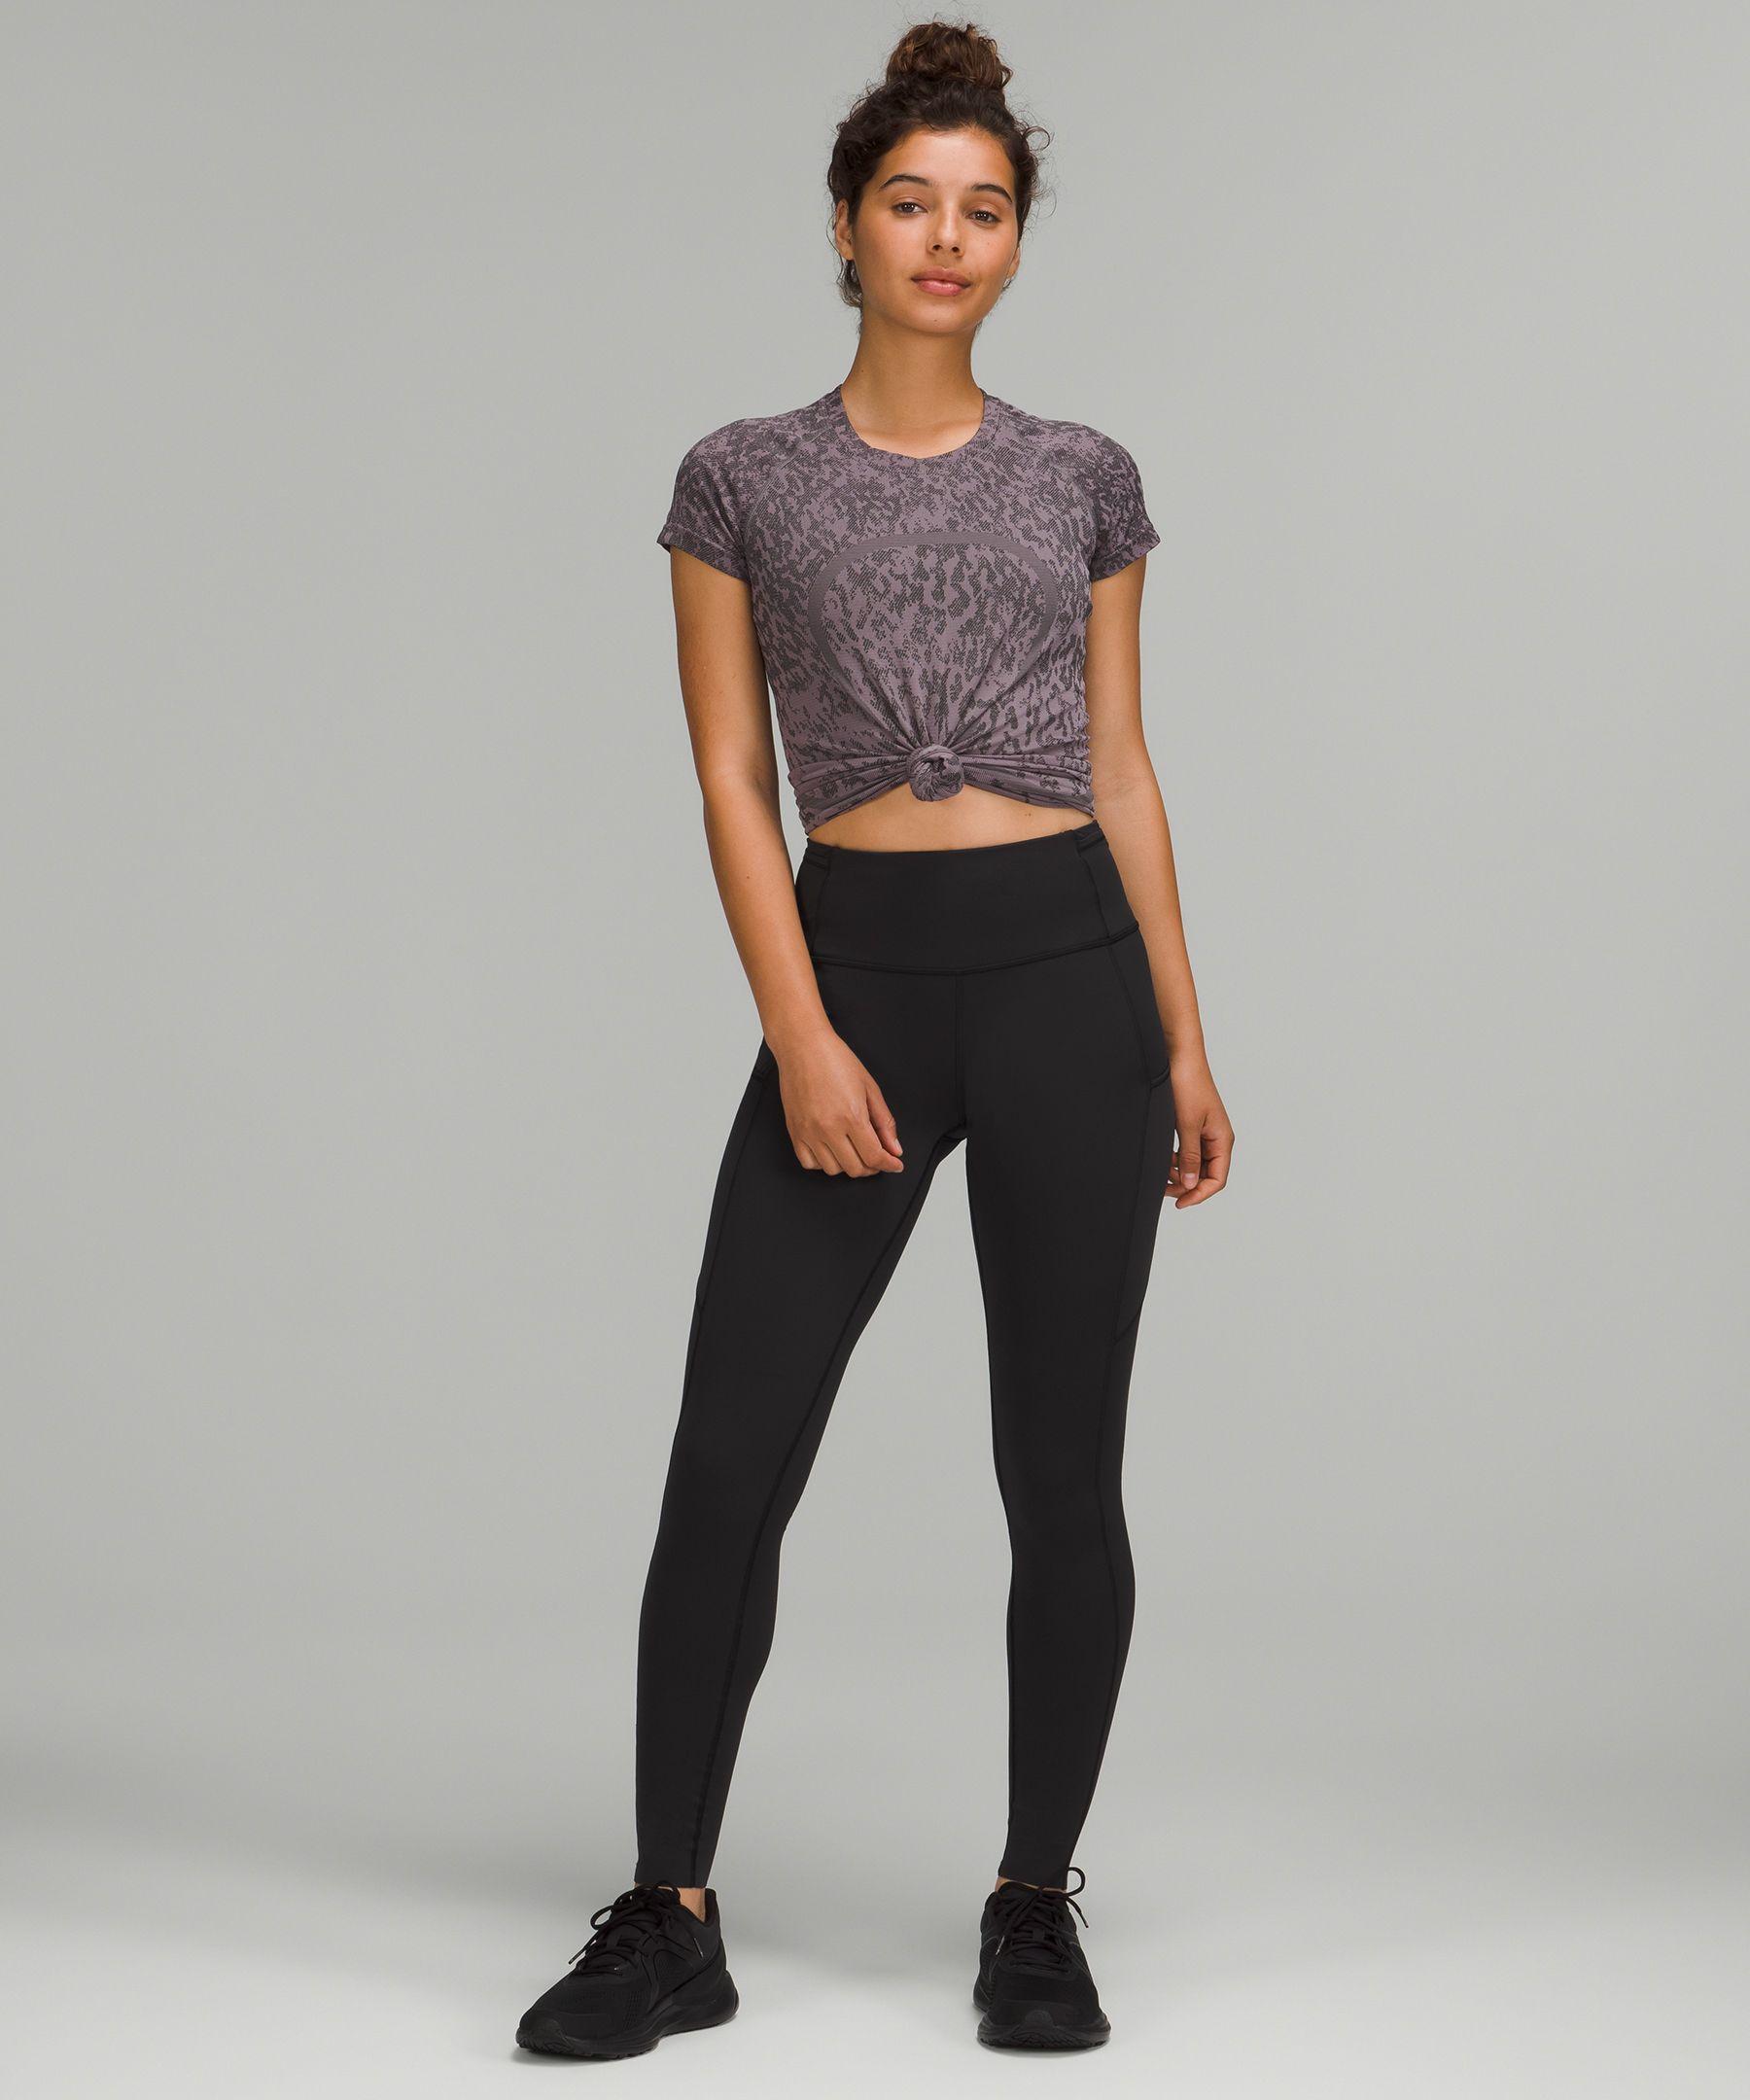 LULULEMON Fast and Free High-Rise Tight 28